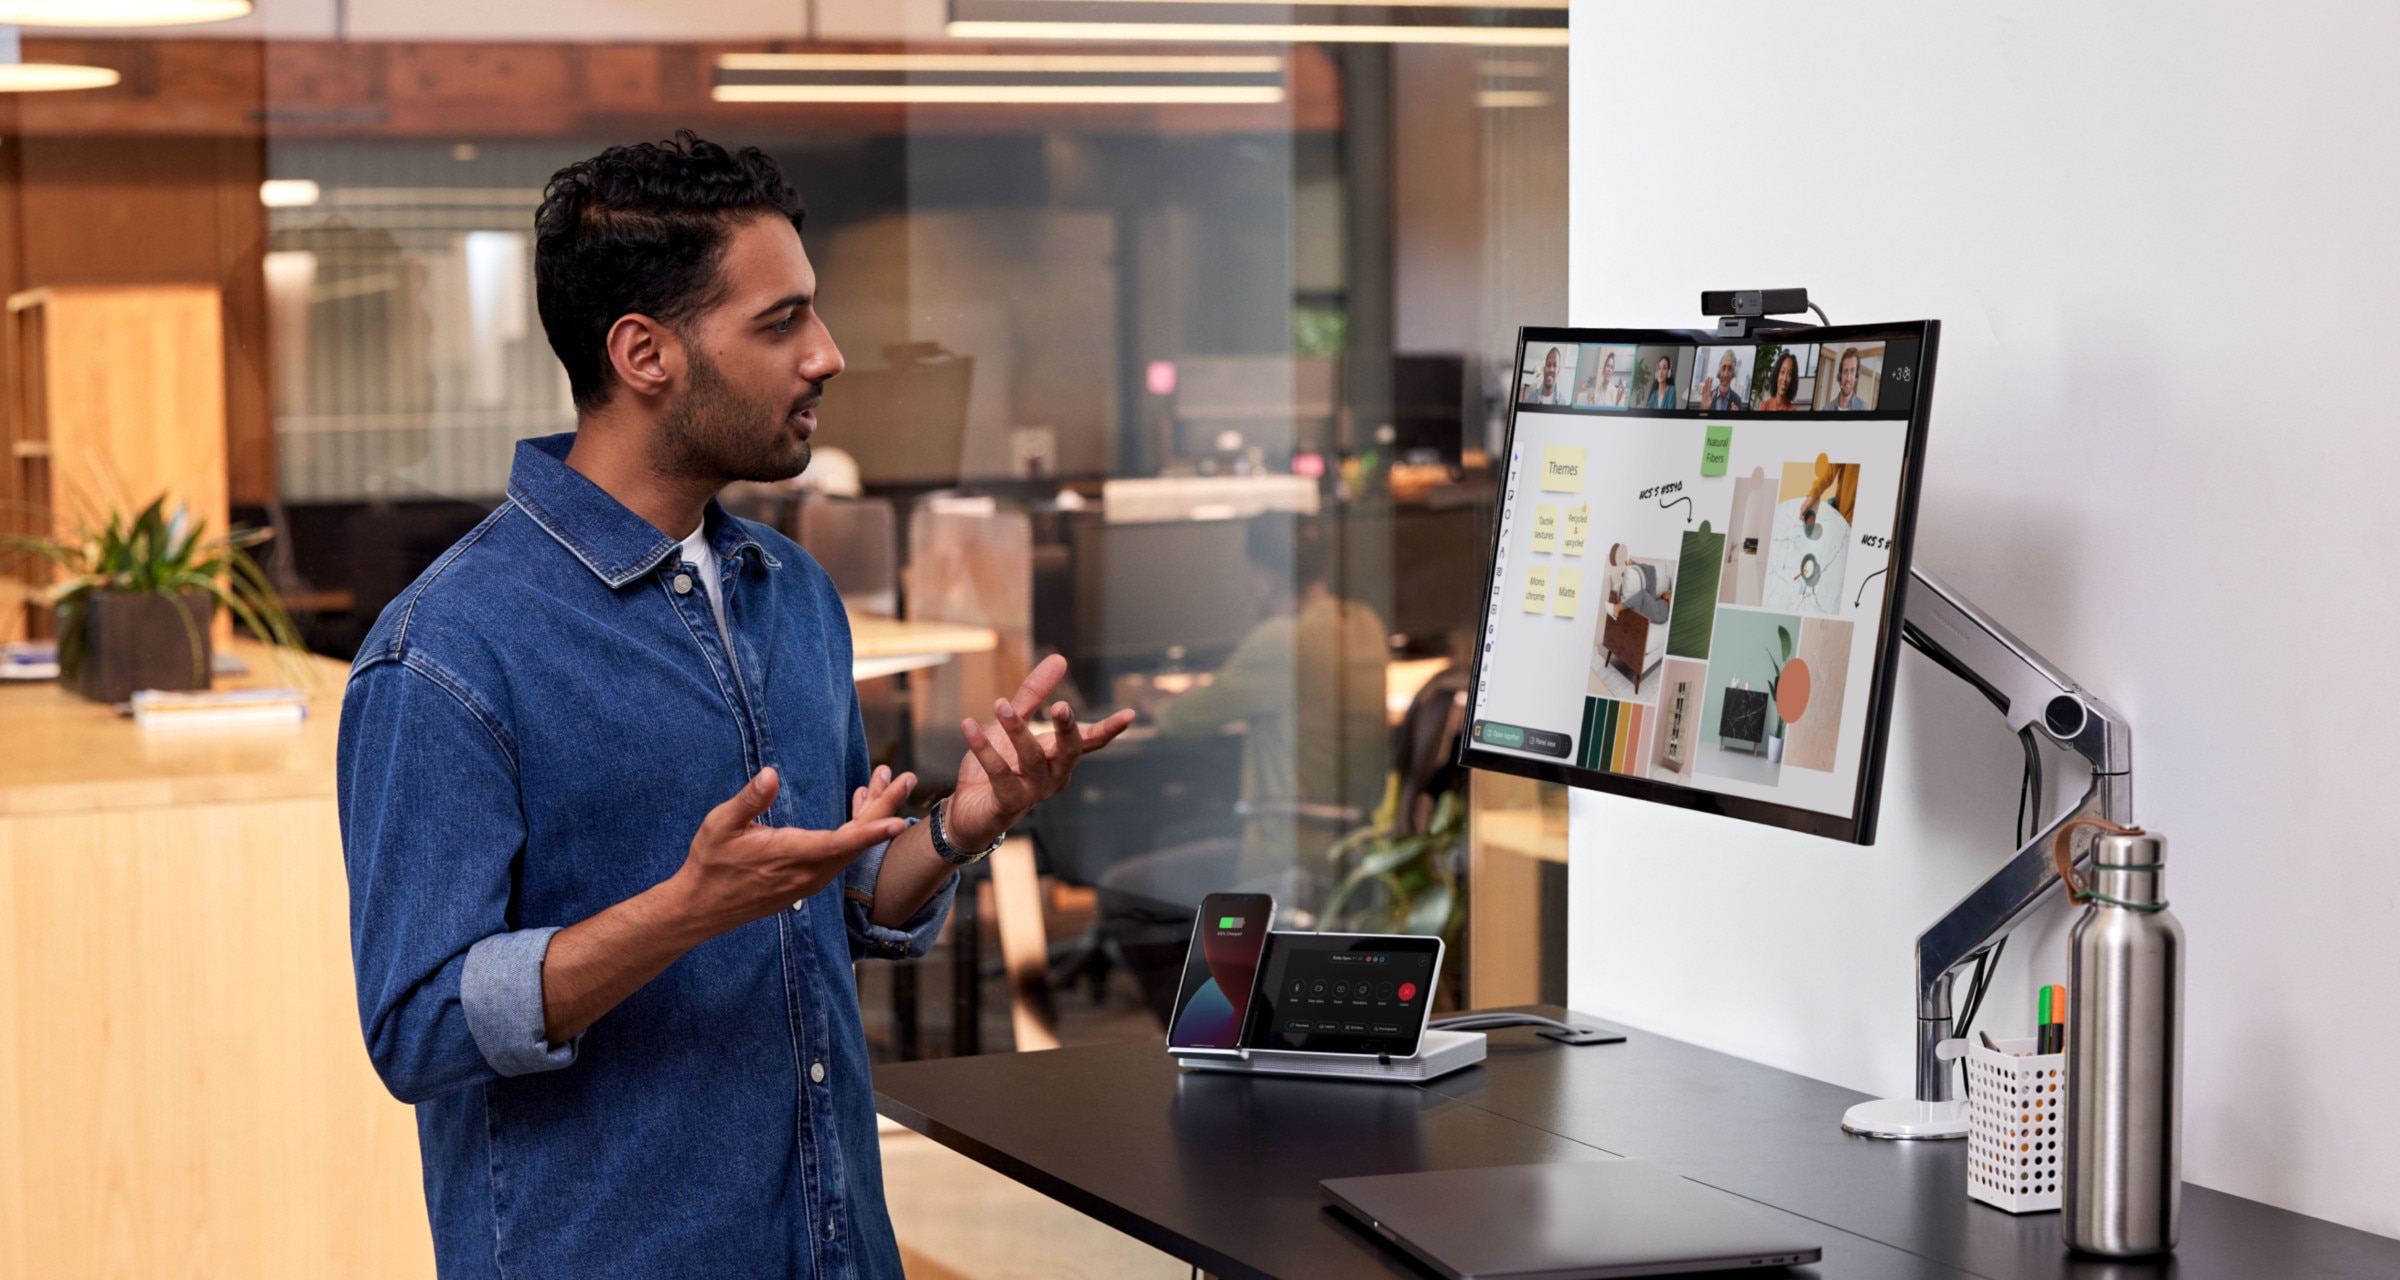 A professional video conferences with colleagues via Webex, collaborating through a Miro board embedded in Webex Meetings.